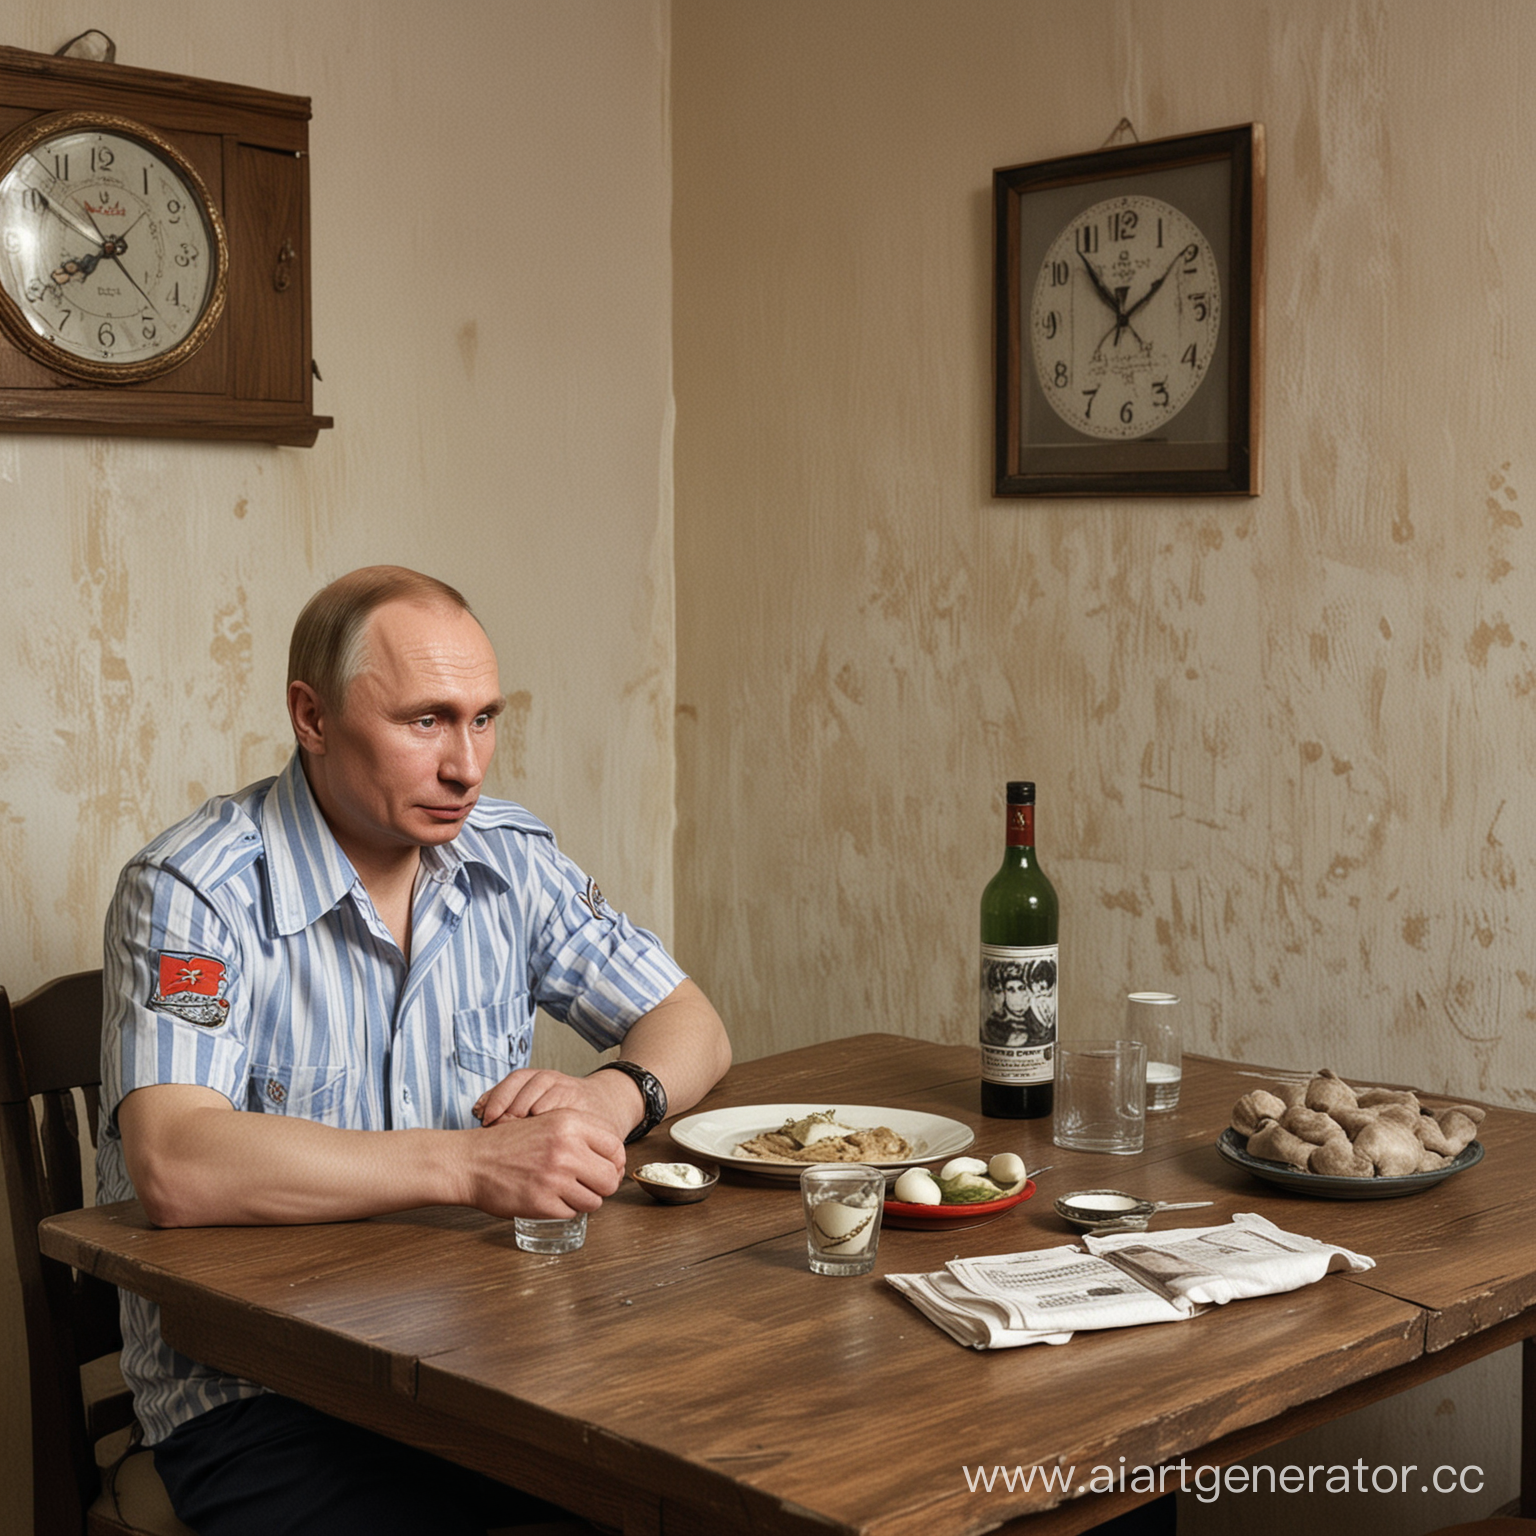 Noir, Drunk Putin in a striped blue and white undershirt and with criminal Russian tattoos on his body and arms is sitting at a table in a Soviet kitchen, to his right is sitting Stalin, dressed the same way as Putin, and to his left is sitting Yeltsin, who is dressed the same way as Putin, on the wall hangs an old Soviet clock, a picture of soviet soldier, and also behind Putin is a purse with fougere dishes. On the table has a bottle of vodka, a shot glass with vodka in it and a plate of pelmeni, depressive atmosphere, soviet photocamera, colored 